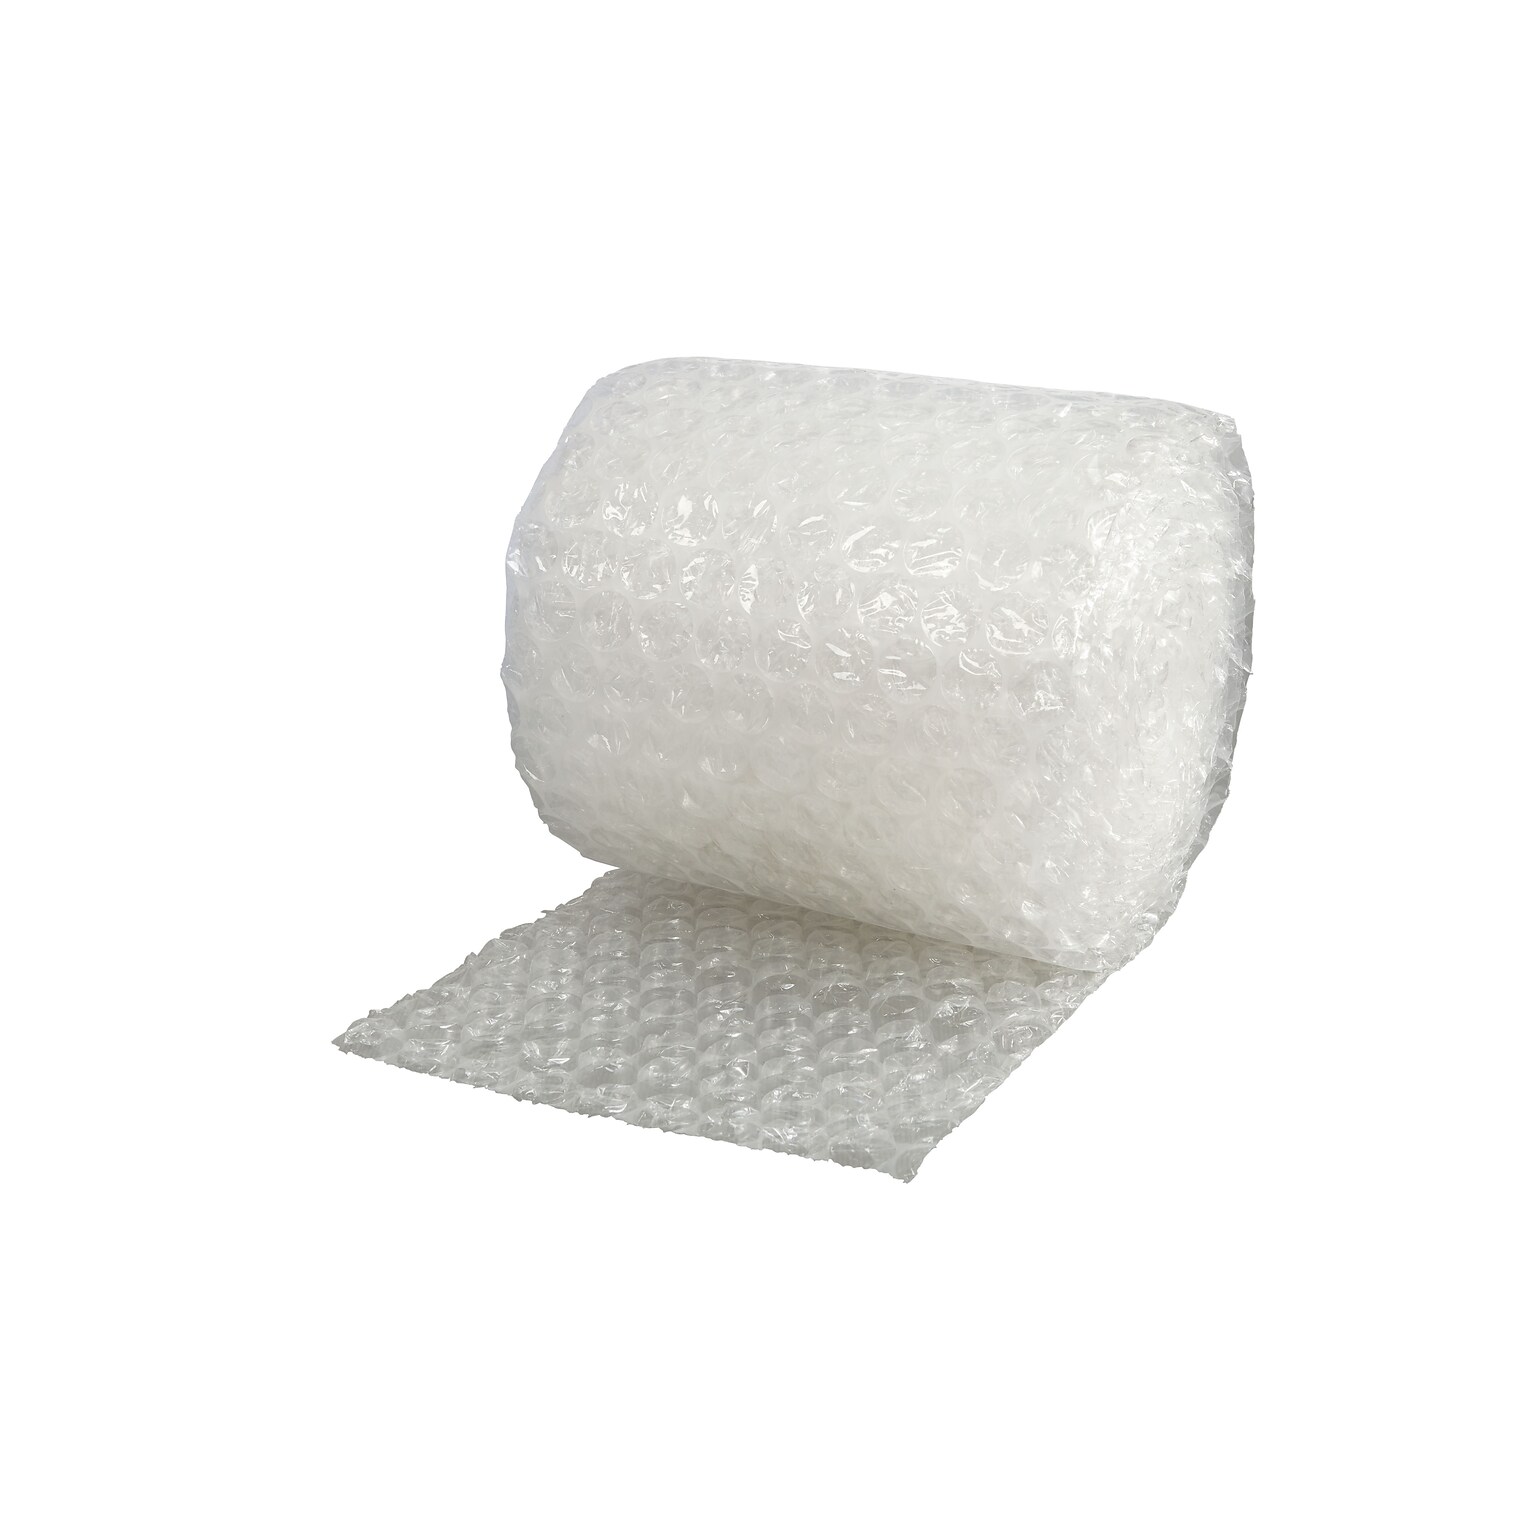 Quill Brand® 5/16 Bubble Roll, 12x30, Each (27176-US/CC)